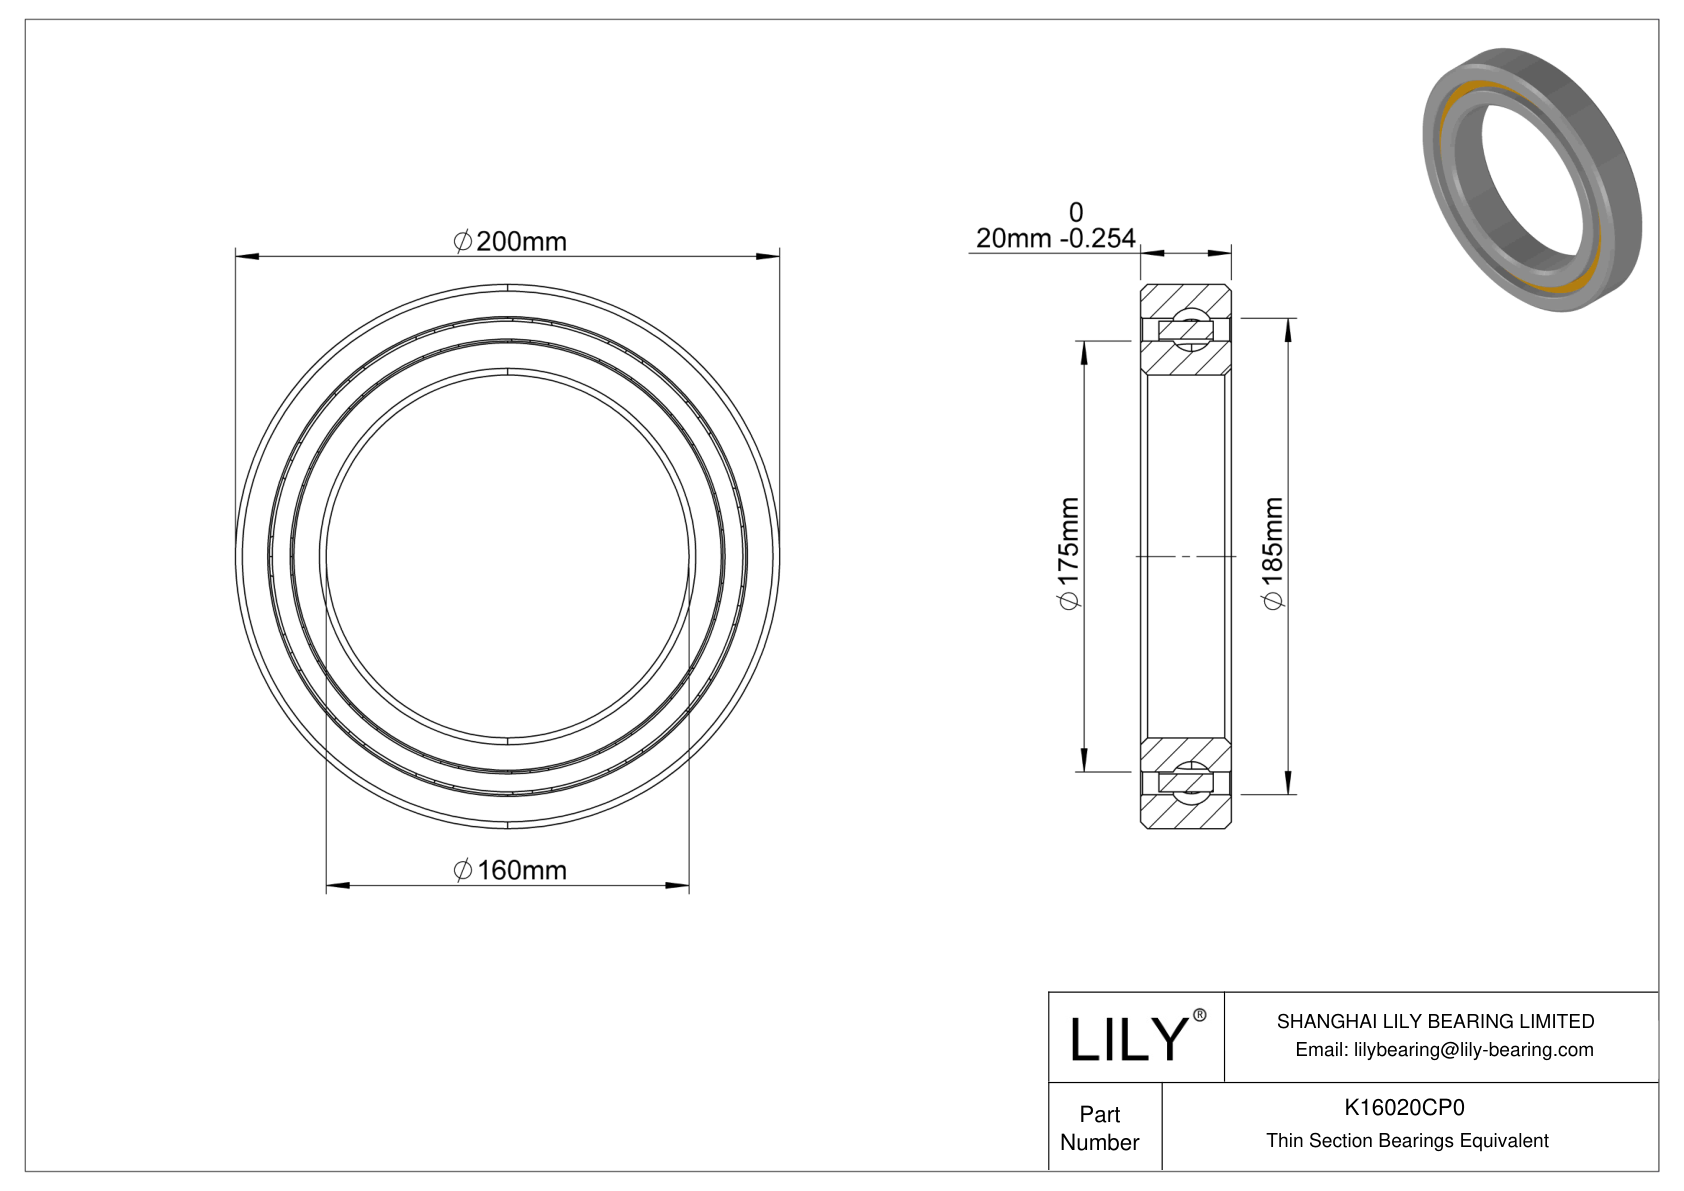 K16020CP0 Constant Section (CS) Bearings cad drawing